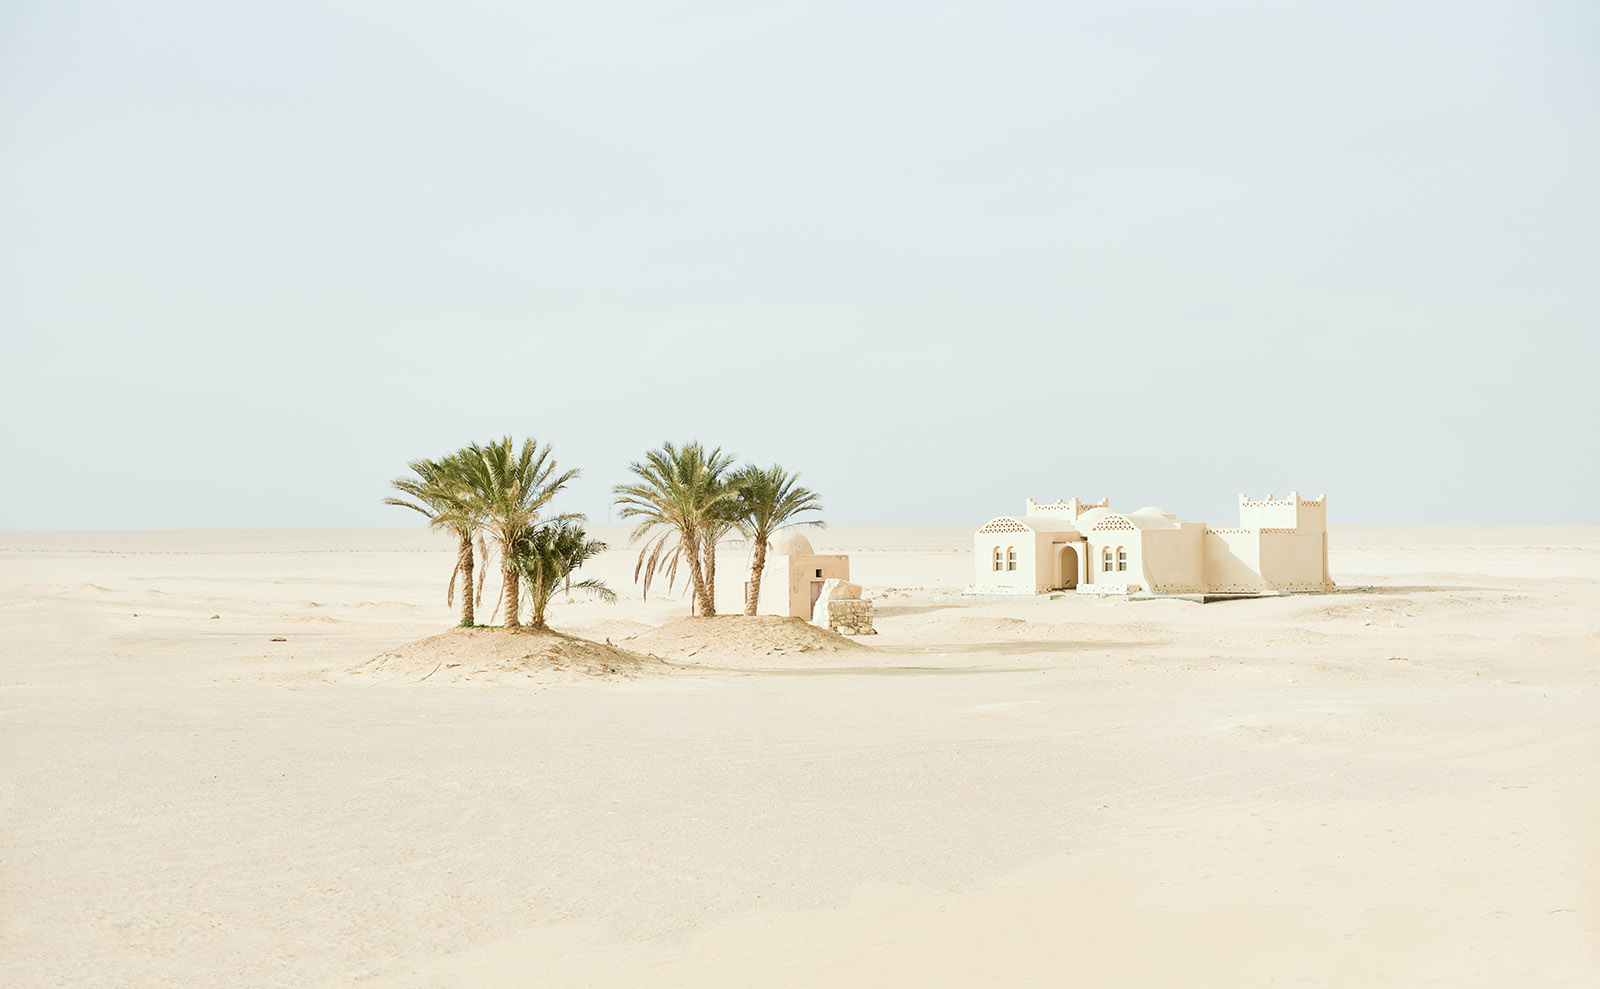 Egypt Oasis, Postcard Stories, Glamping, Travel Guide Love & More: Endnotes 28 August